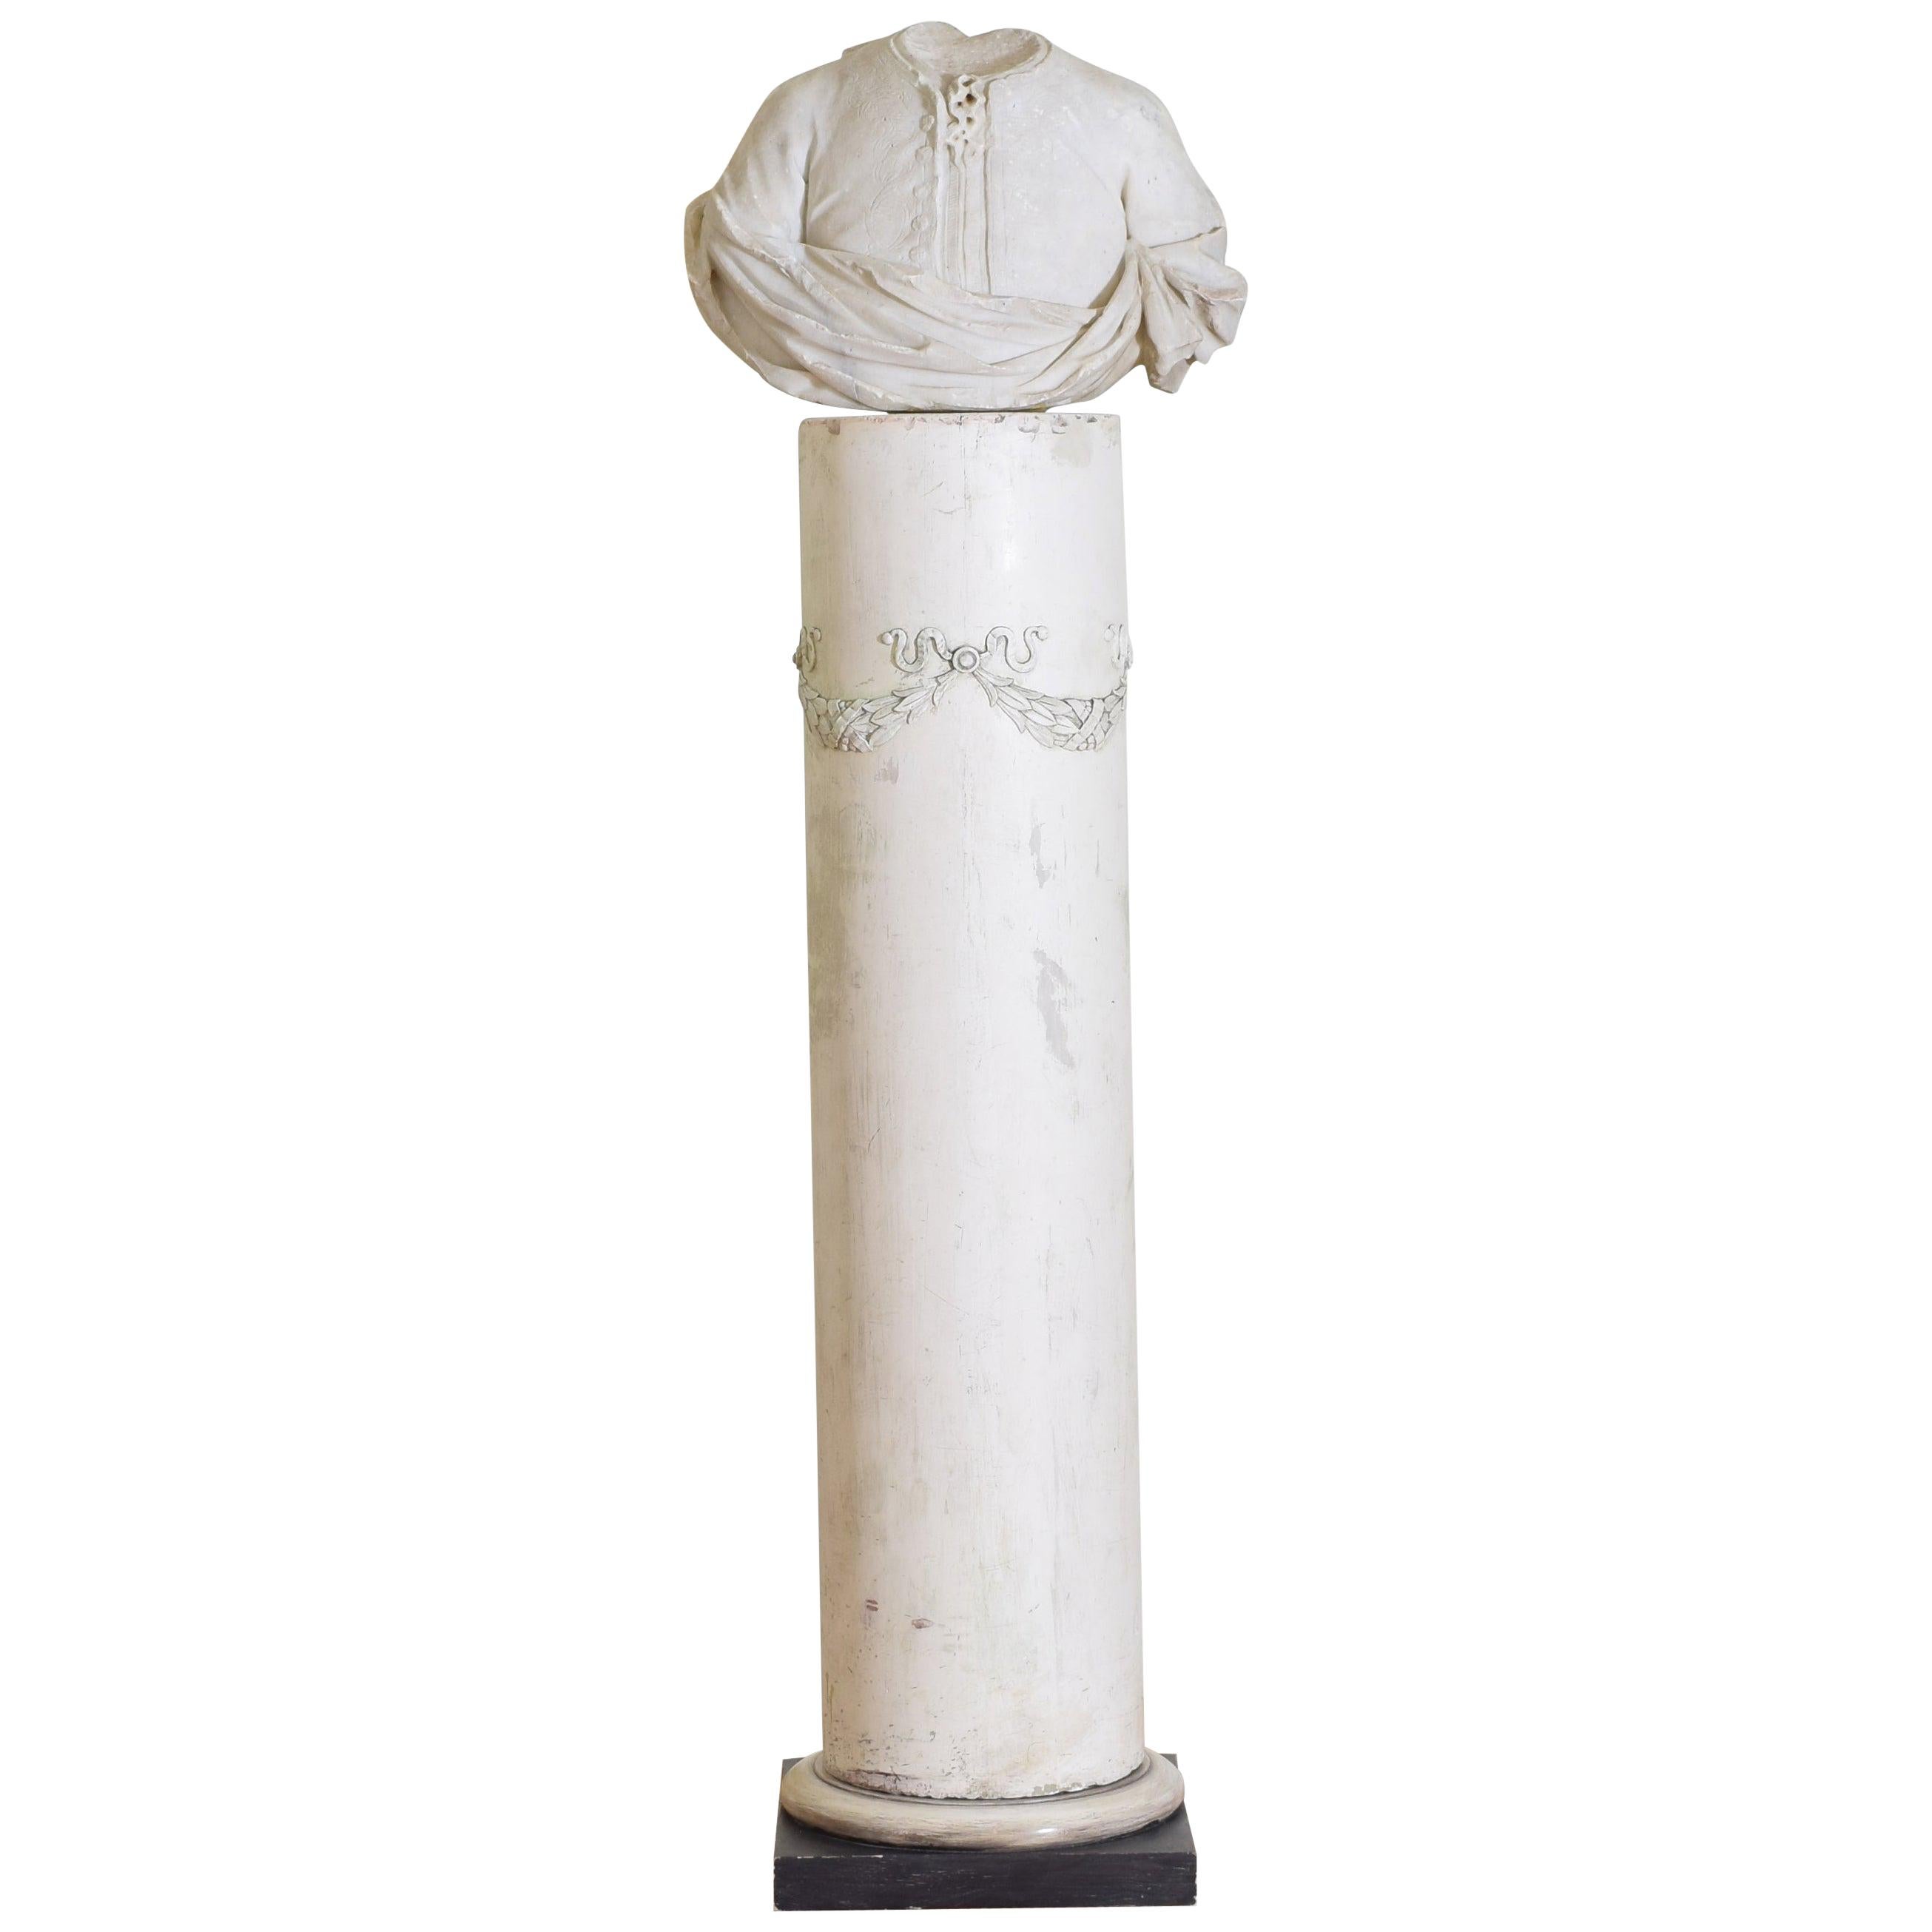 Italian Bust in Statuary Marble on Later Plaster Pedestal, 18th-19th Century